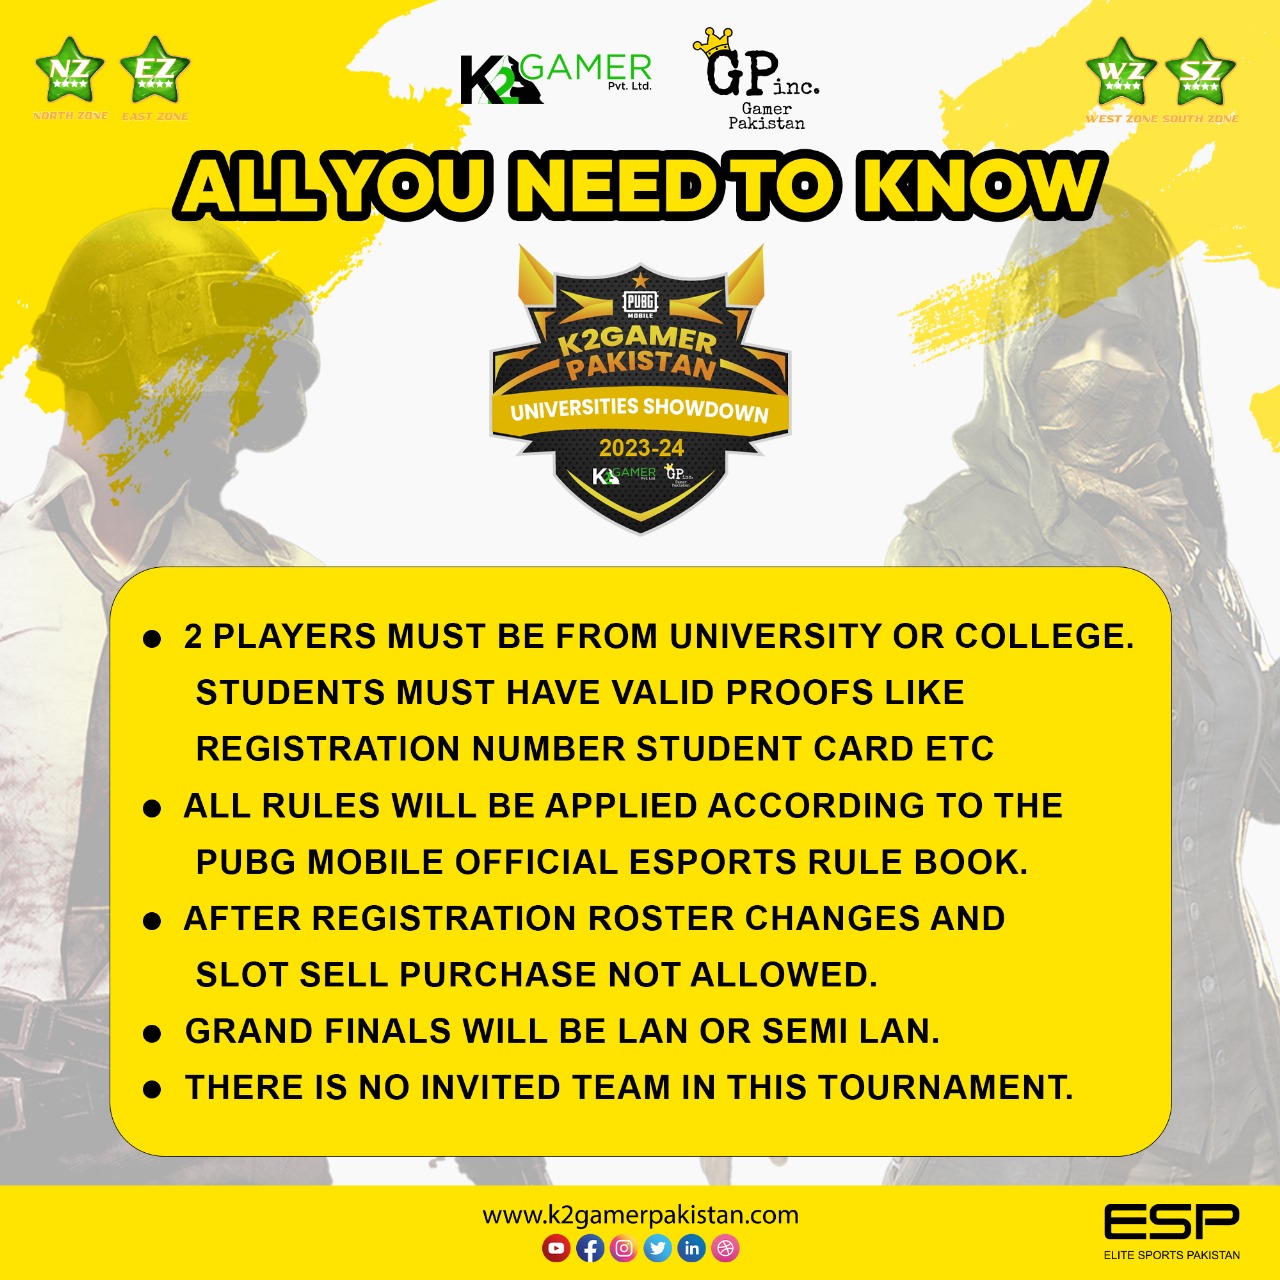 All you need to know about PubgM K2 Gamers Pakistan Universities Showdown 2023-24.